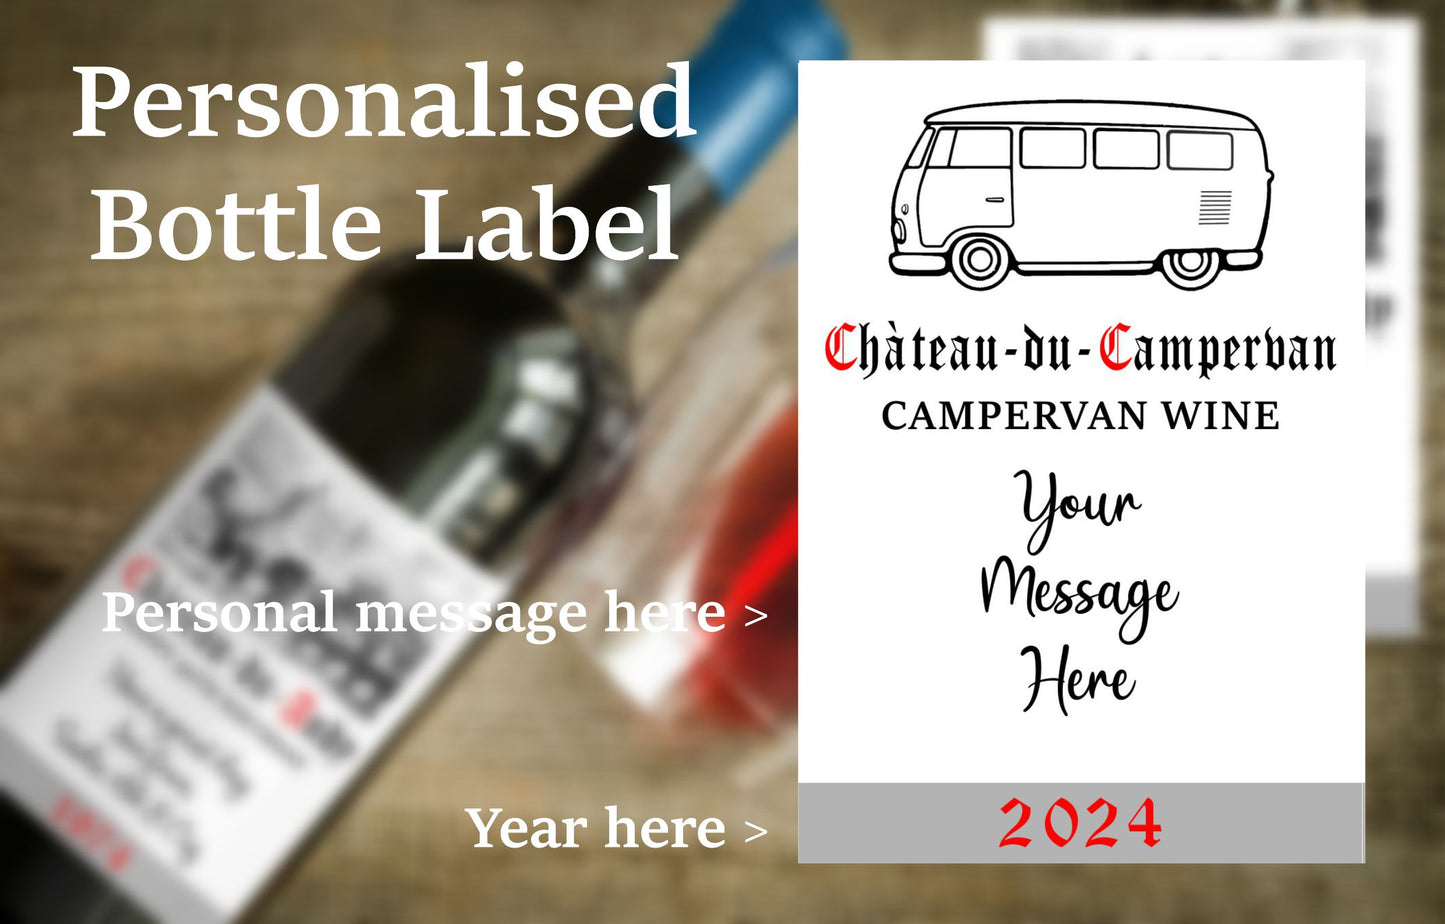 Campervan Wine Bottle Label x2 - Chateau du Campervan - Personalise Year and Message - To fit Most Alcohol Bottles Custom Gift